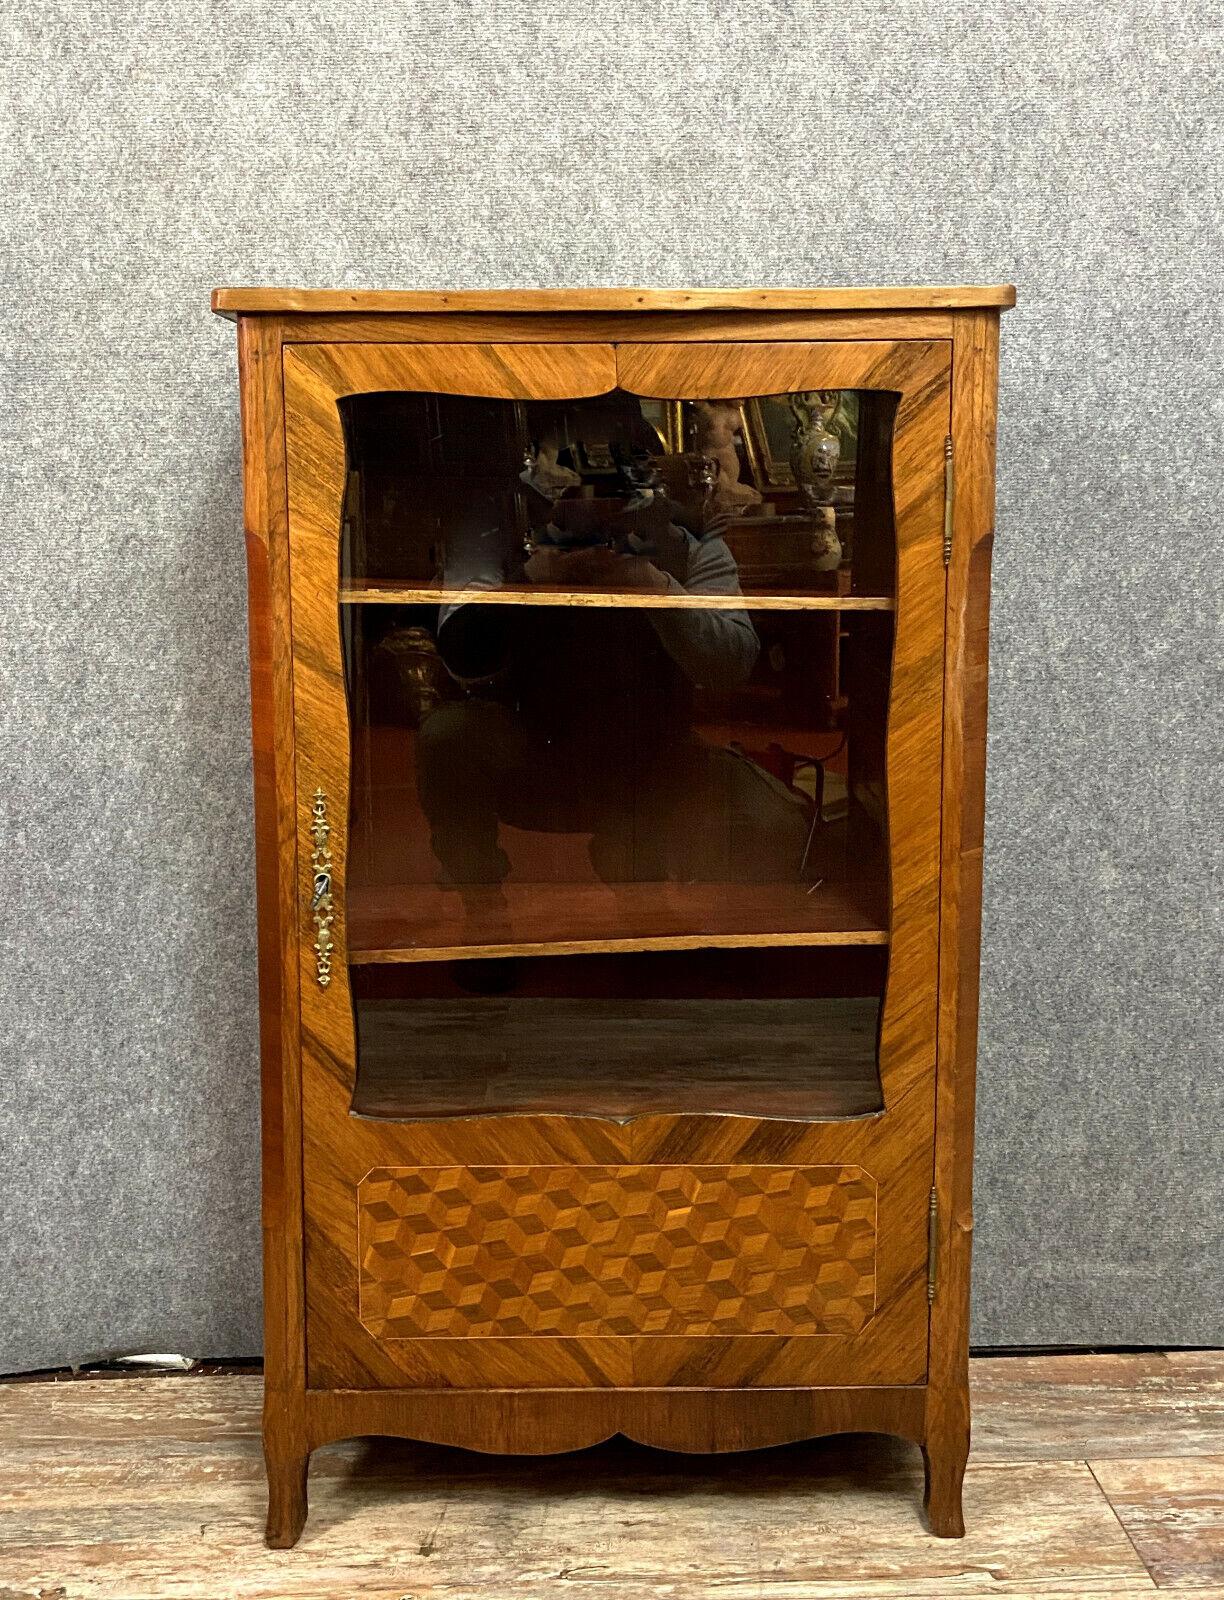 Stunning Louis XV-style bookcase featuring precious wood marquetry.
Front facade opens with a paneled and glazed door for easy access.
Intricate marquetry design showcases cube motifs for added elegance.
Gracefully stands on curved feet, flanked by